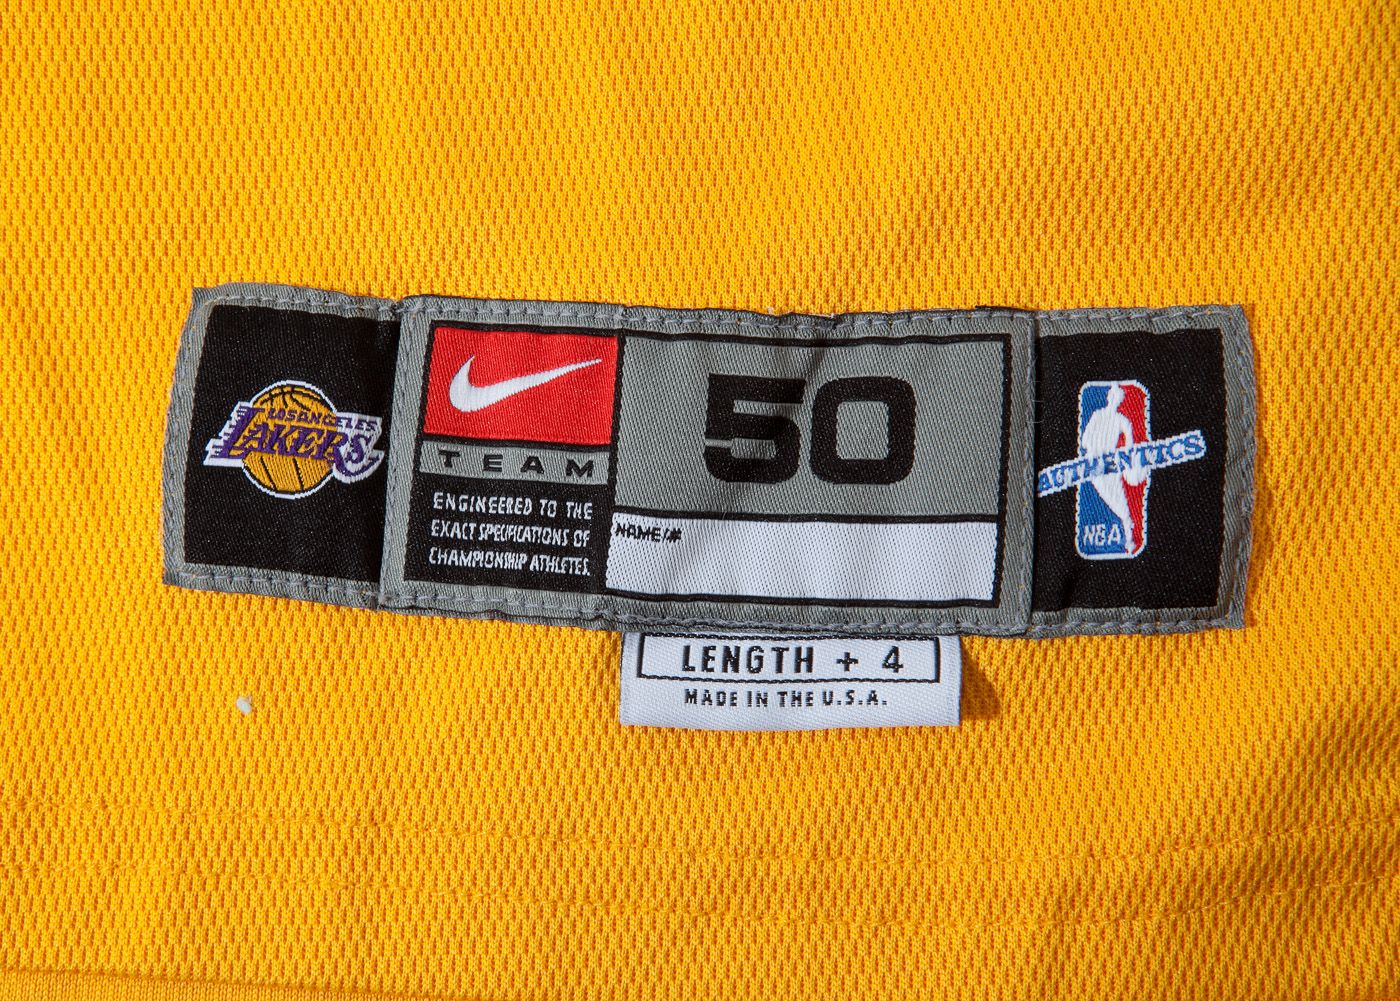 Lot Detail - 2001/2002 KOBE BRYANT LOS ANGELES LAKERS GAME WORN JERSEY AND  1999/00 GAME WORN SHORTS